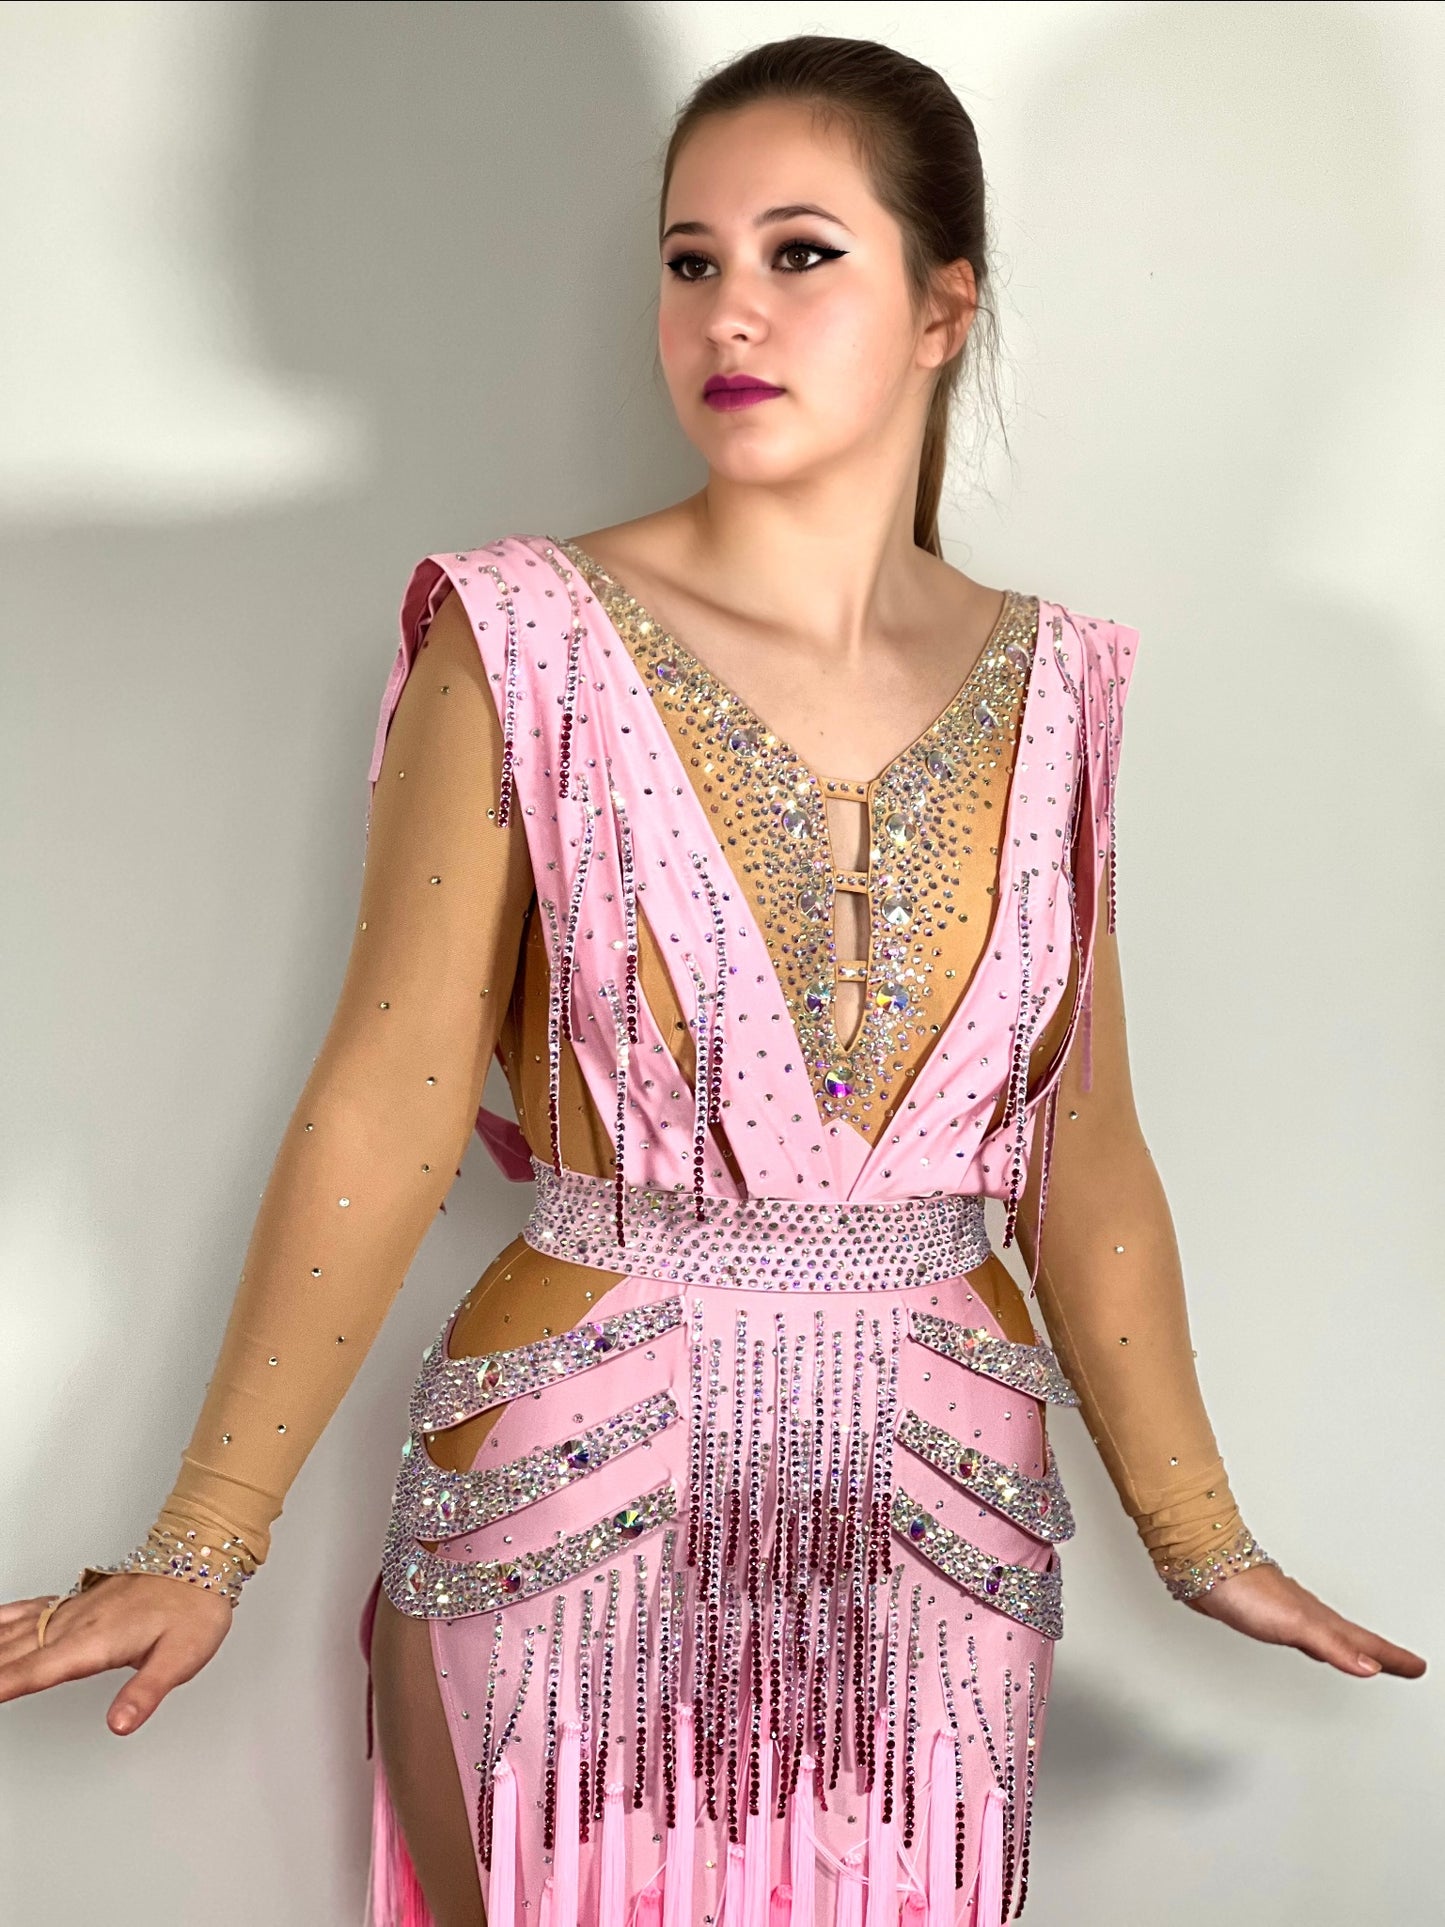 112 Ombré Fringed Latin Dress. Side strap detailing to the hips with sash feature at the back & front. Stoned in AB, Light Rose & Rose. Optional Belt